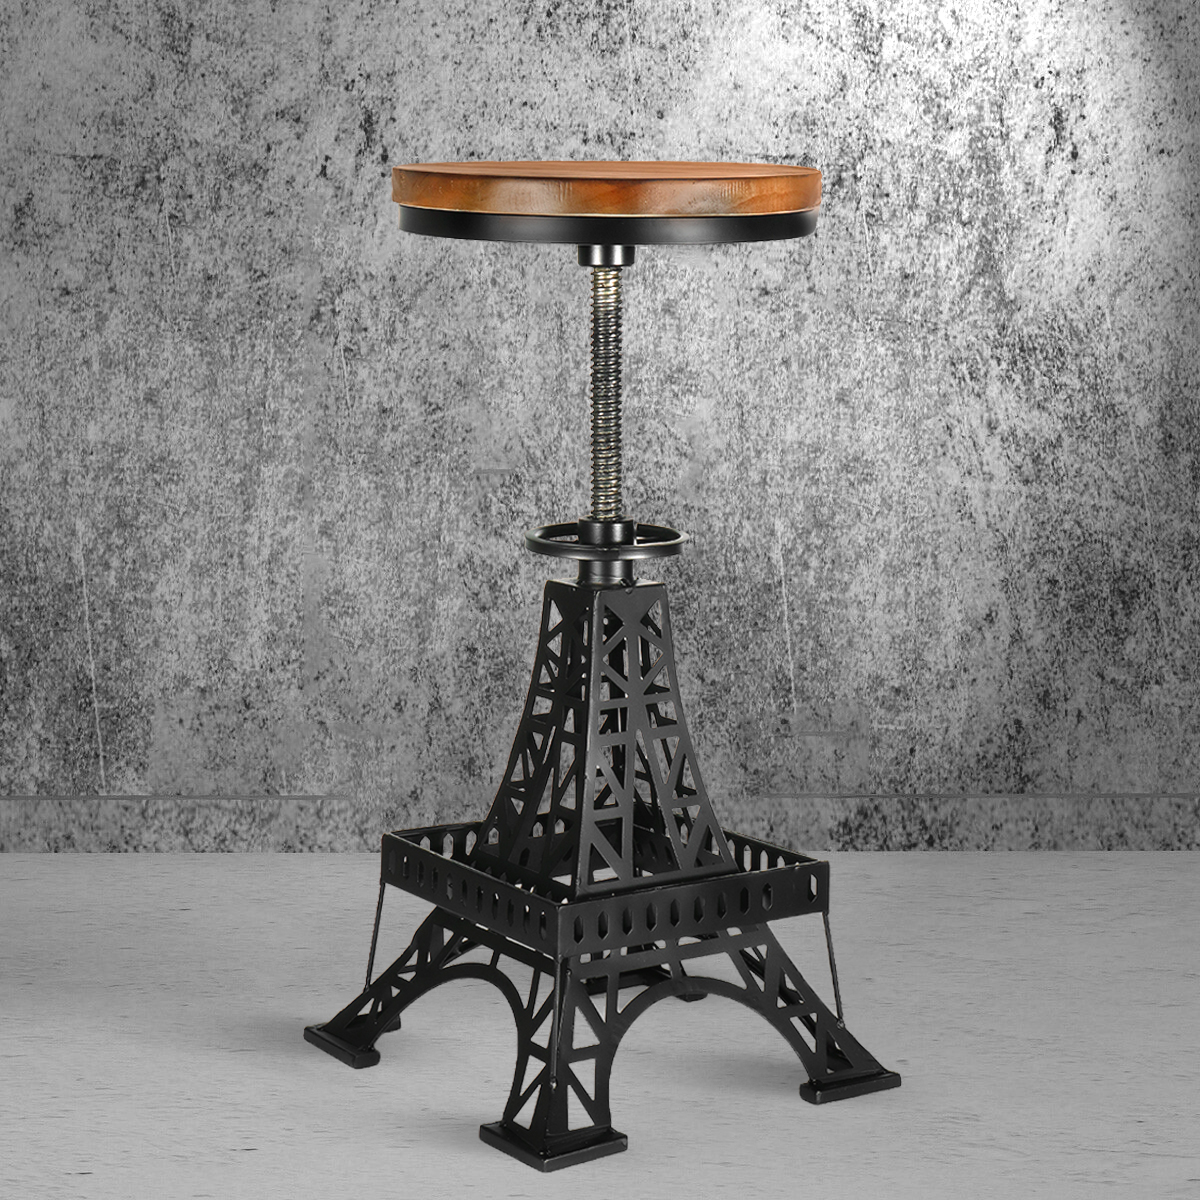 

Vintage Unique Industrial Iron Tower Metal Black Bar Stool Chair Round Wooden Top Kitchen Side Table Adjustable Height